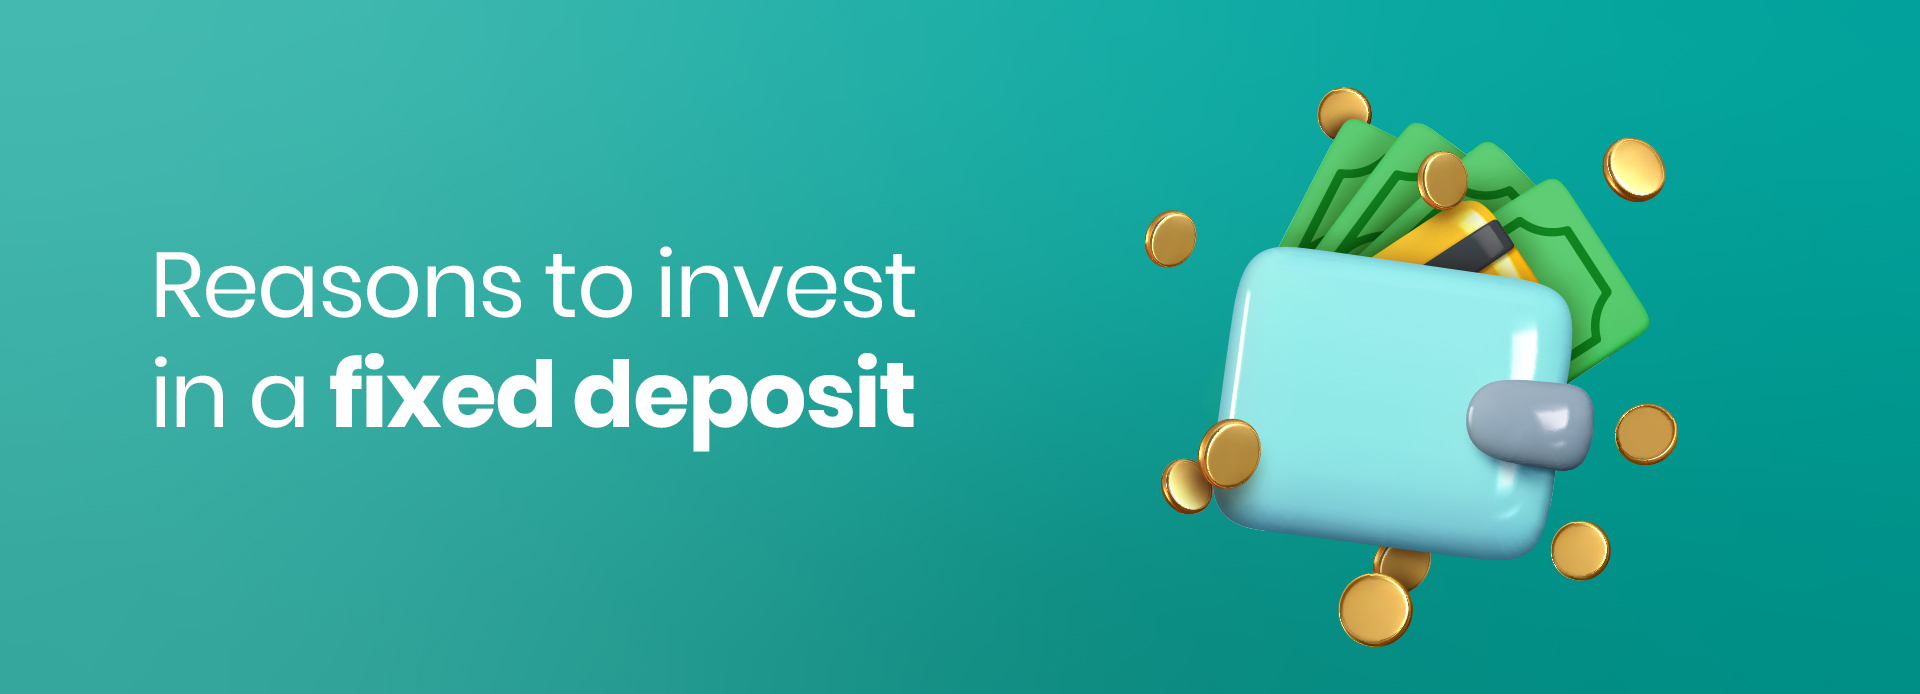 Top 5 reasons to invest in a Fixed Deposit